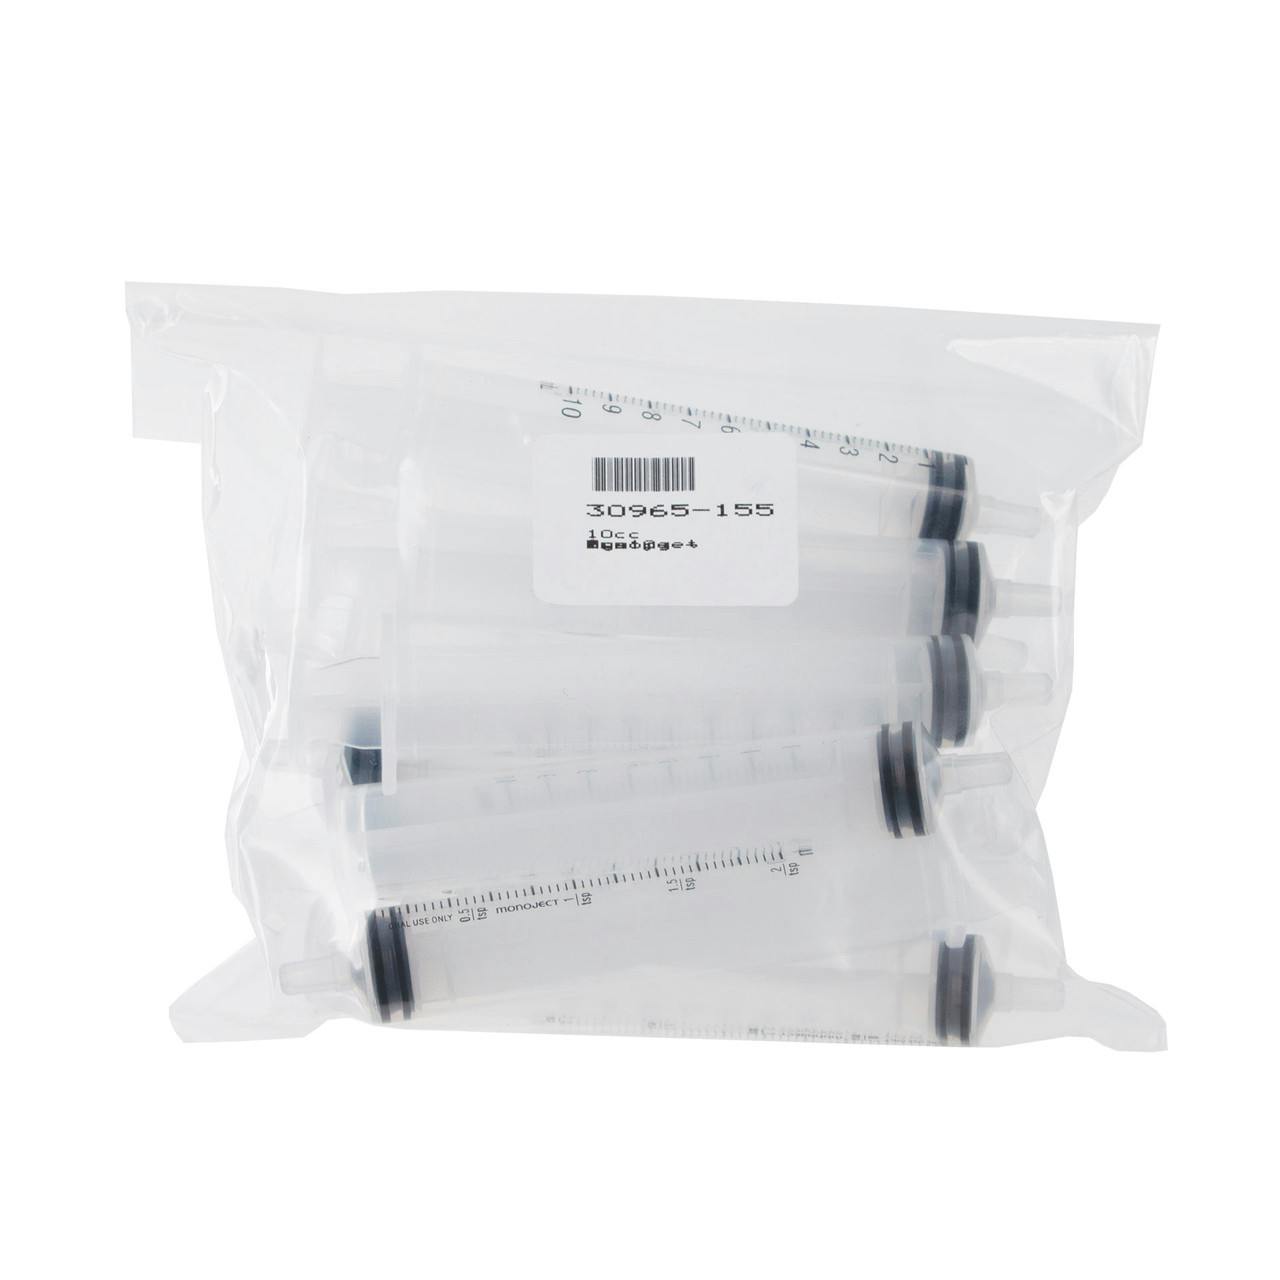 A clear bag that is holding multiple clear syringes.